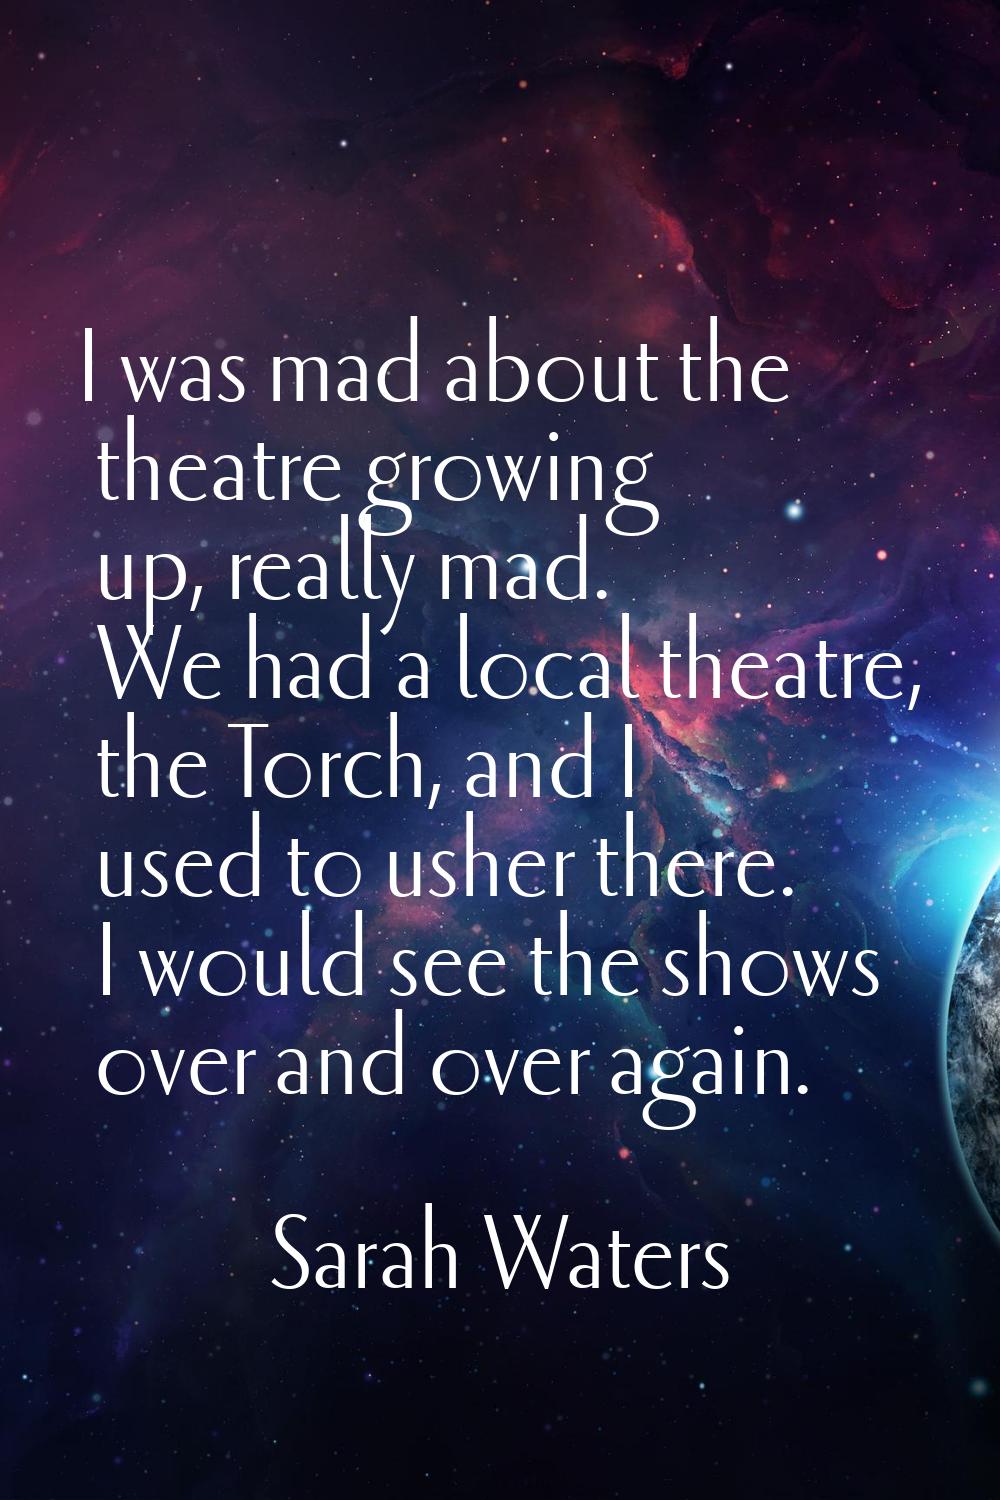 I was mad about the theatre growing up, really mad. We had a local theatre, the Torch, and I used t